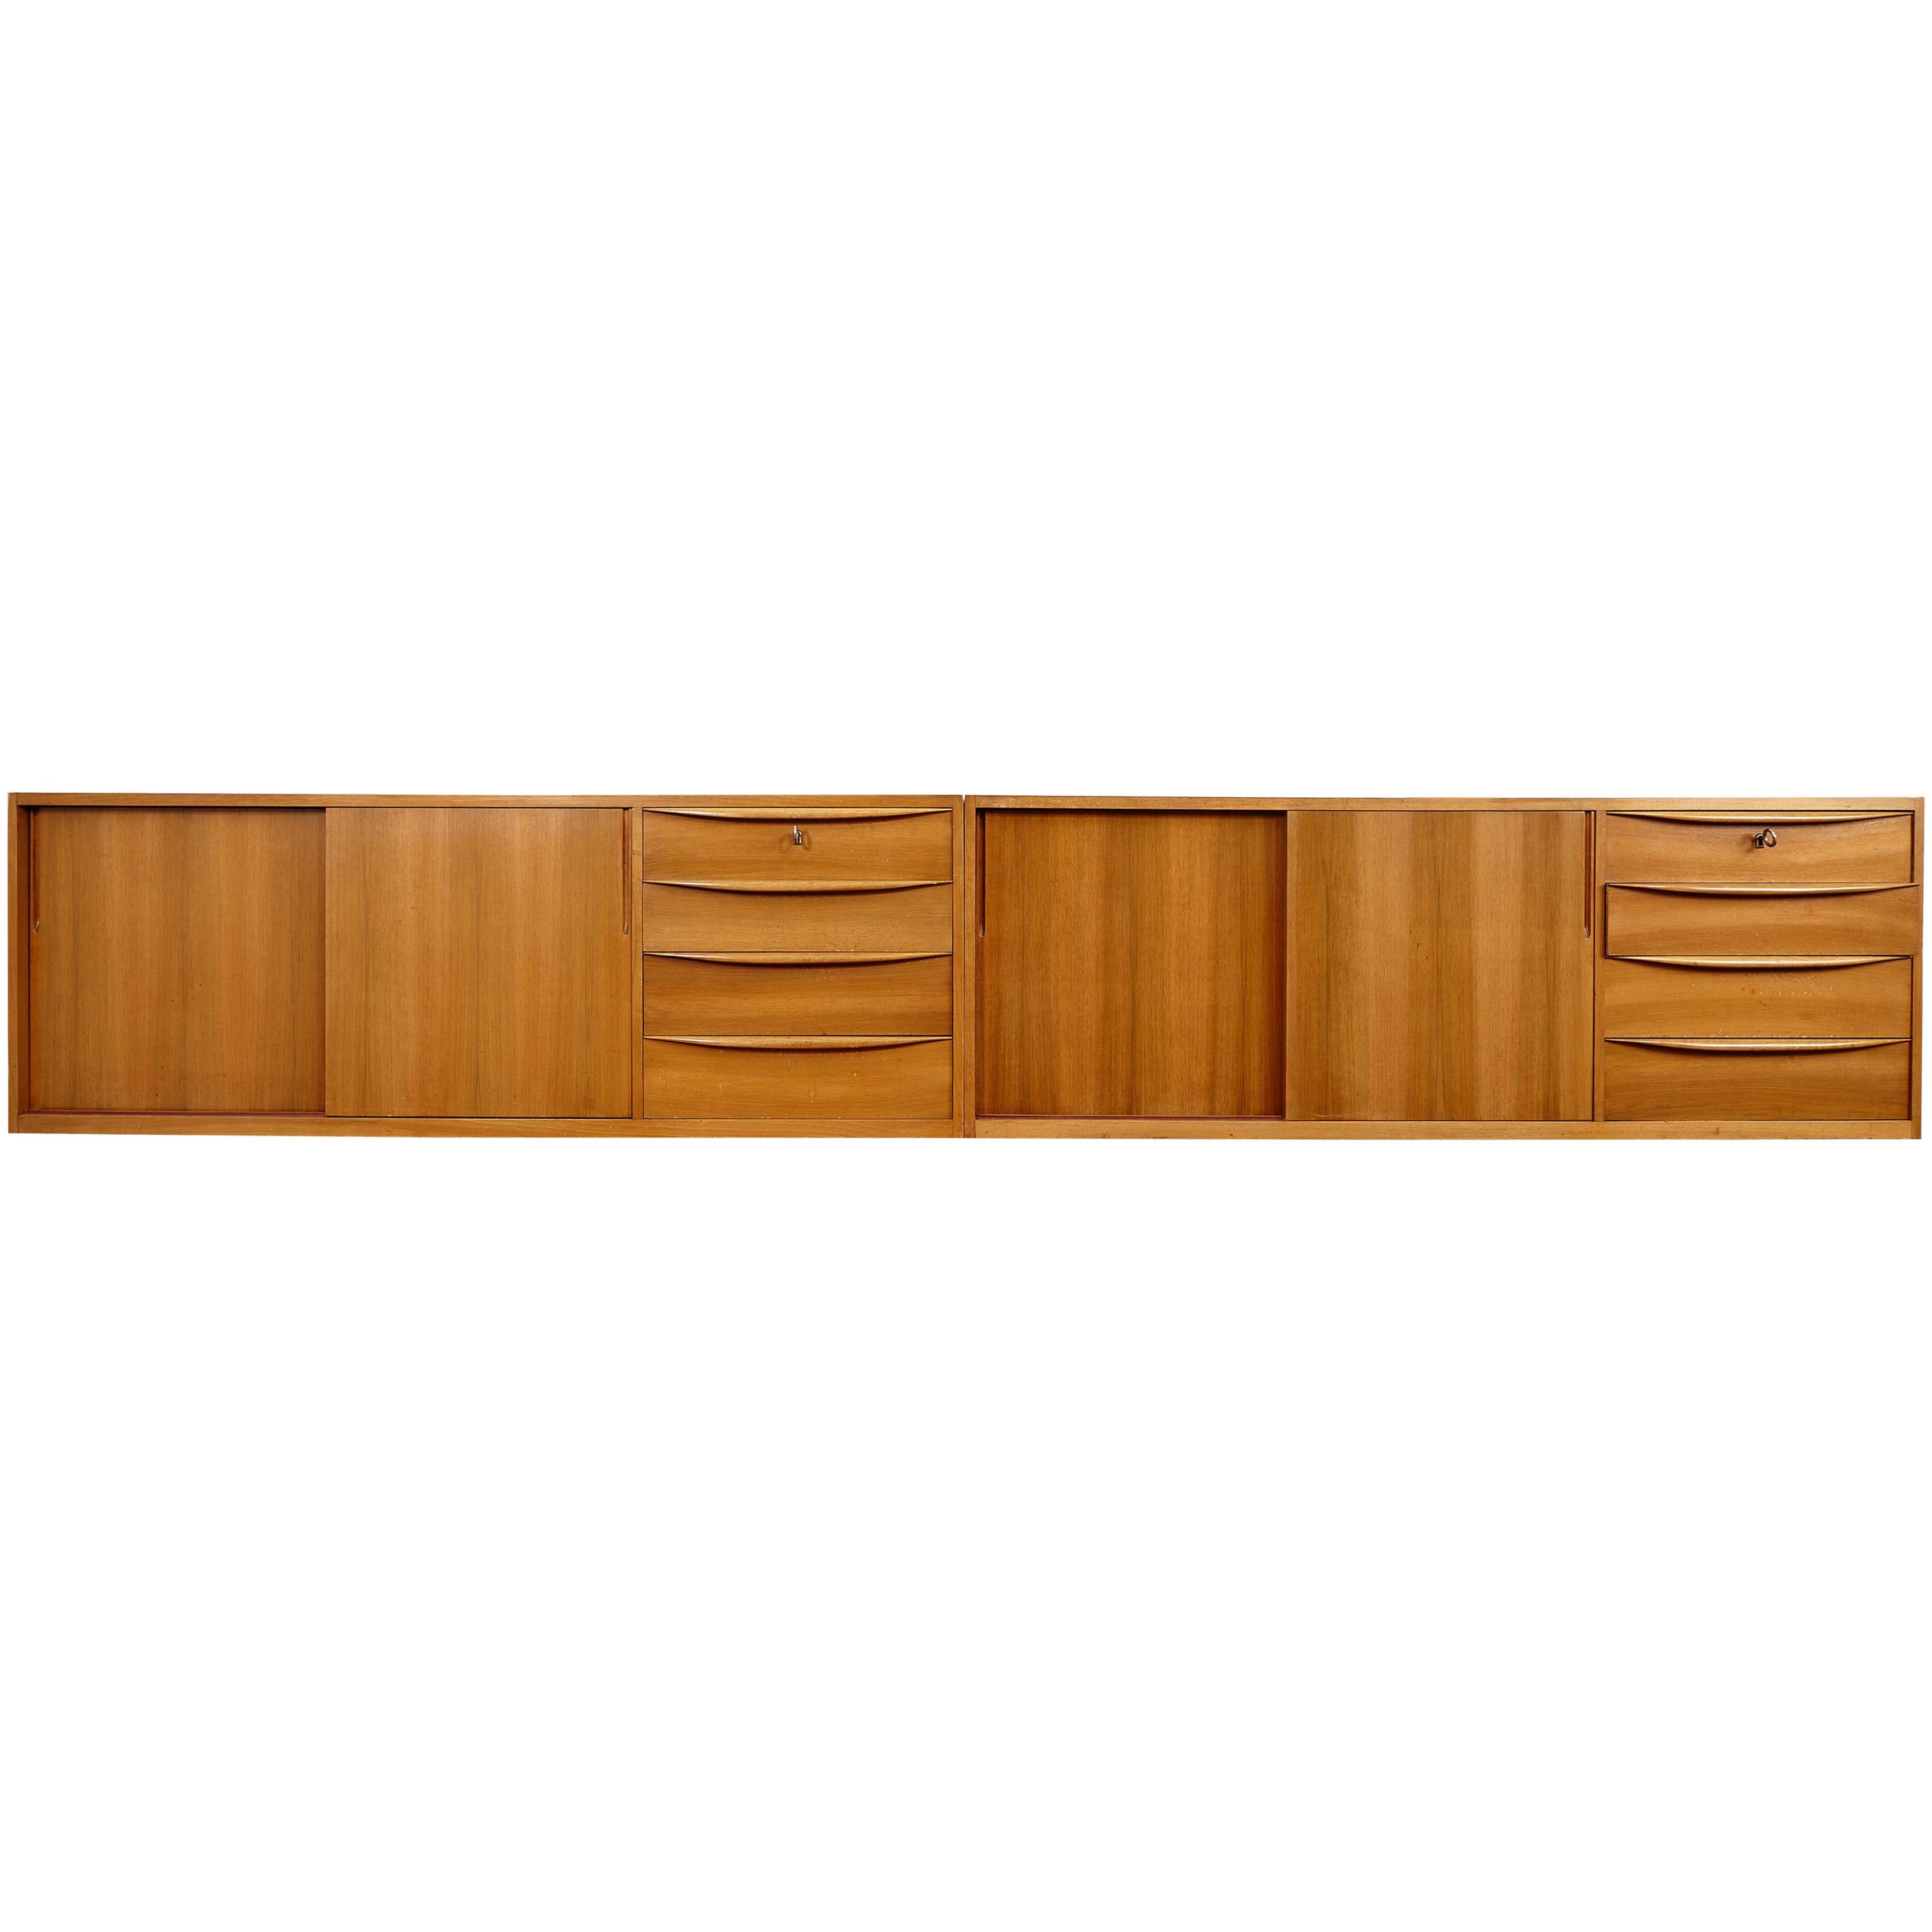 Two Elegant Linear Floating Sideboards from WK Möbel, Germany, 1960s